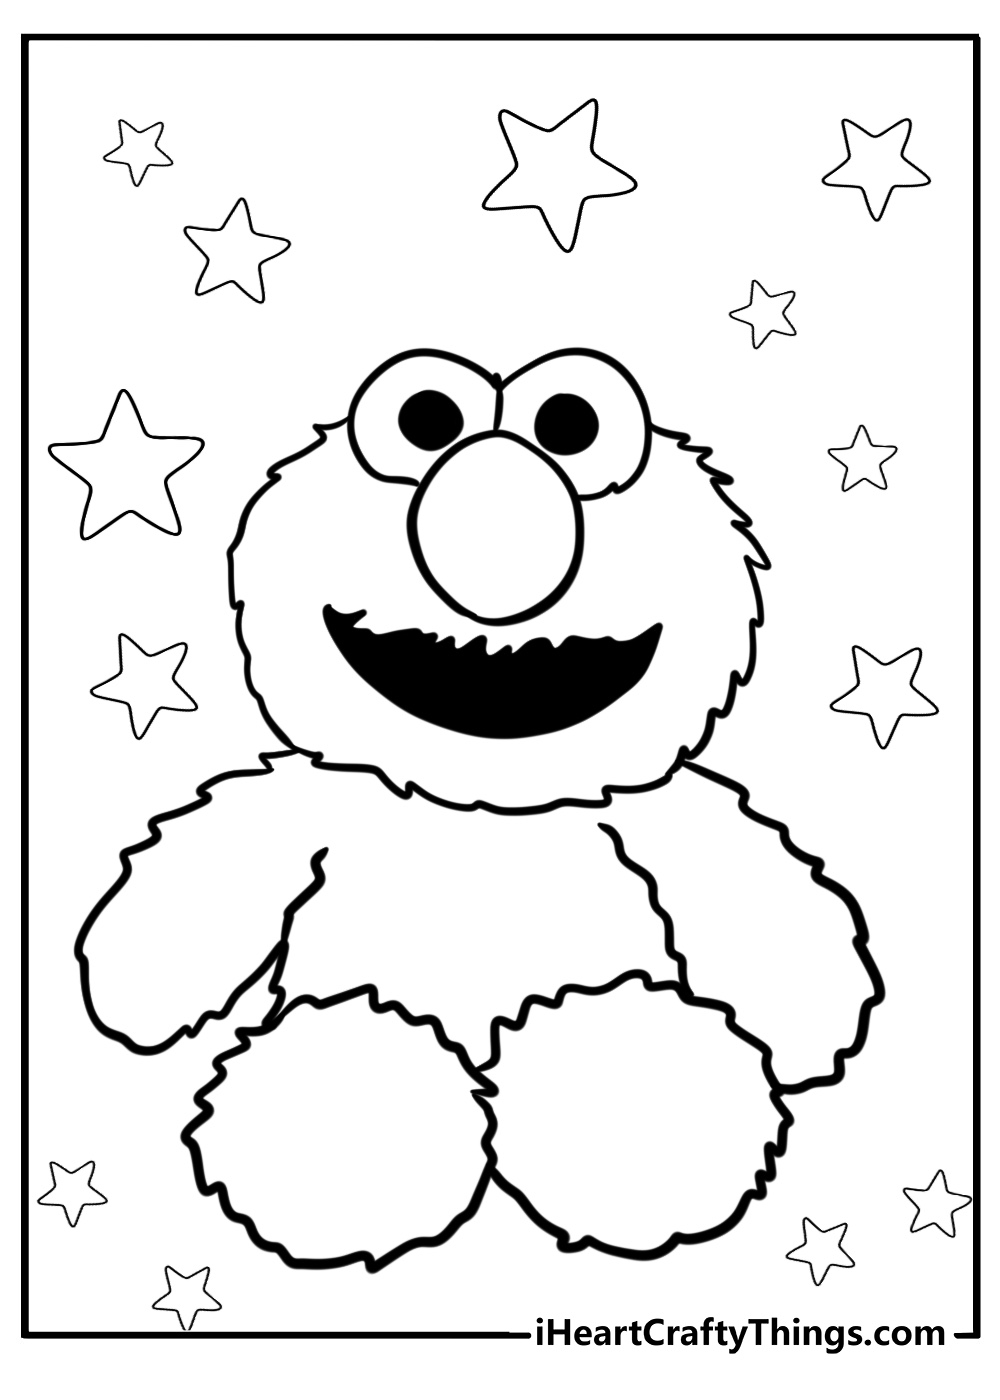 Baby elmo coloring page for kids